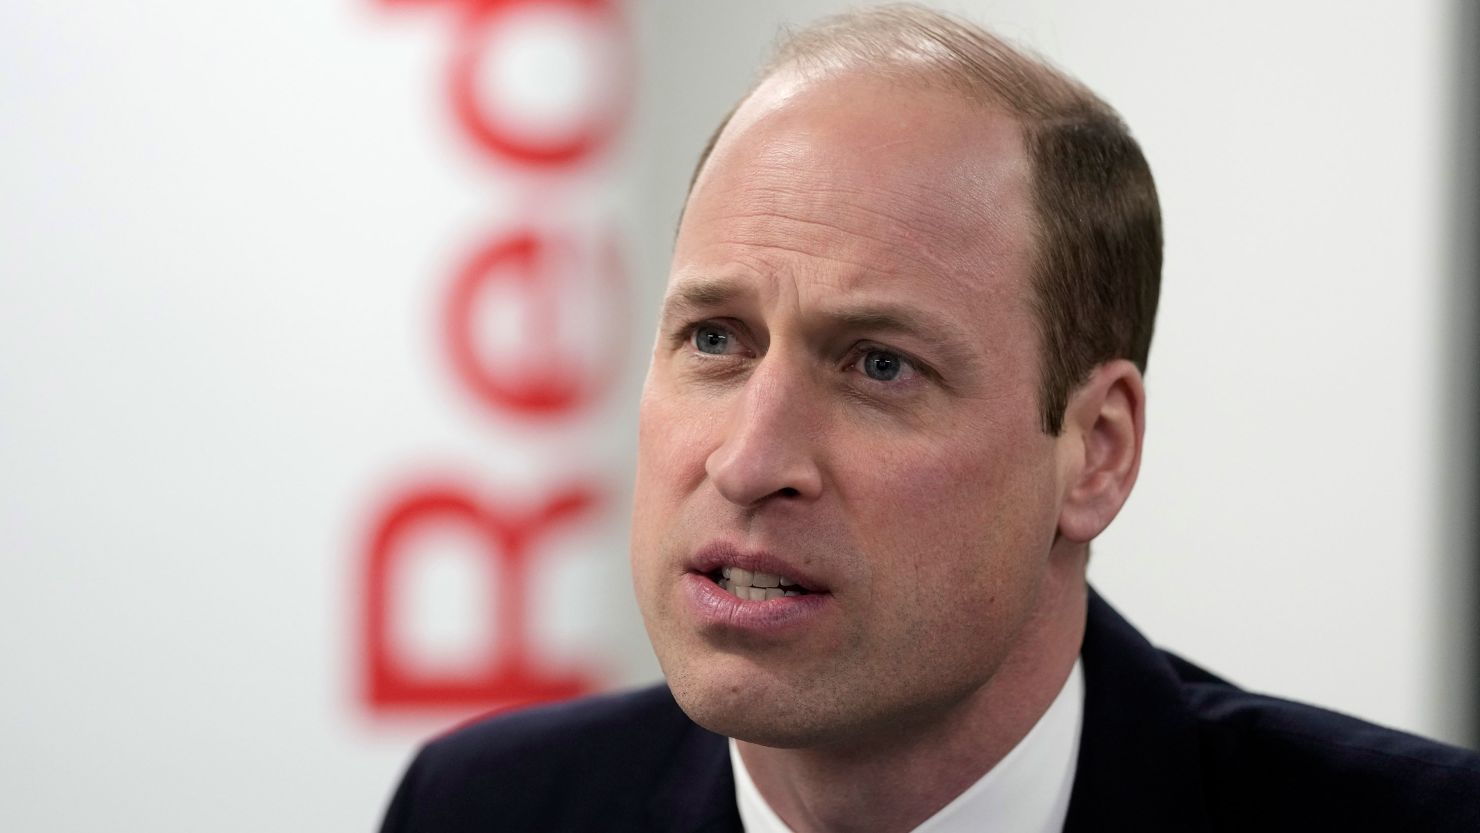 Prince William visits the British Red Cross on February 20 in London.